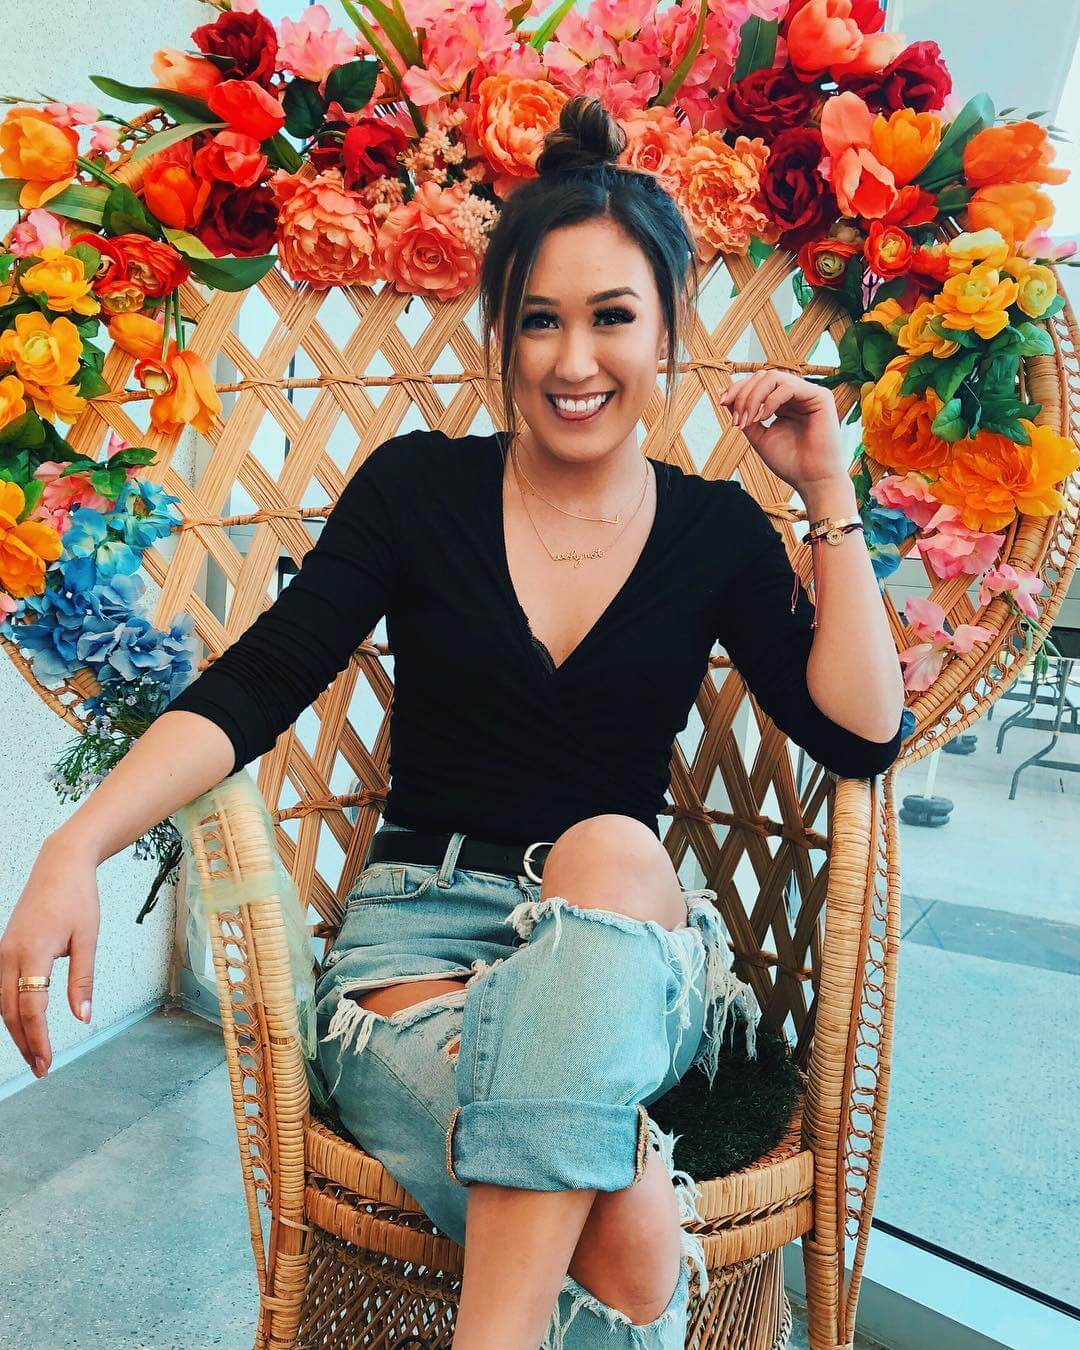 51 Hottest LaurDIY Big Butt Pictures Which Will Make You Swelter All Over 45